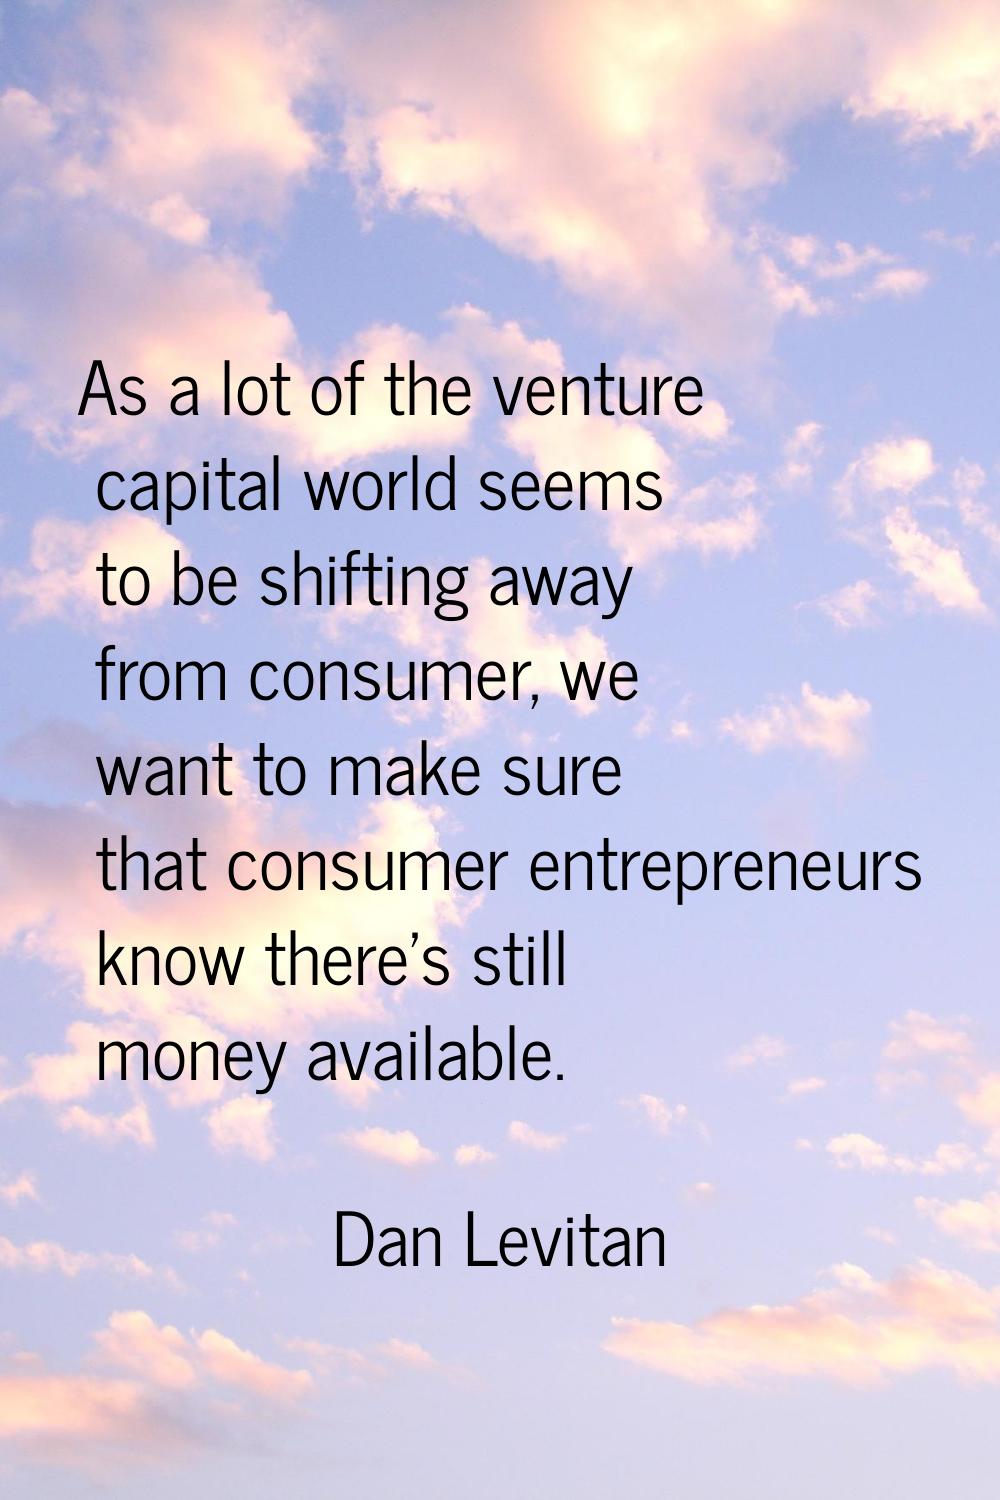 As a lot of the venture capital world seems to be shifting away from consumer, we want to make sure